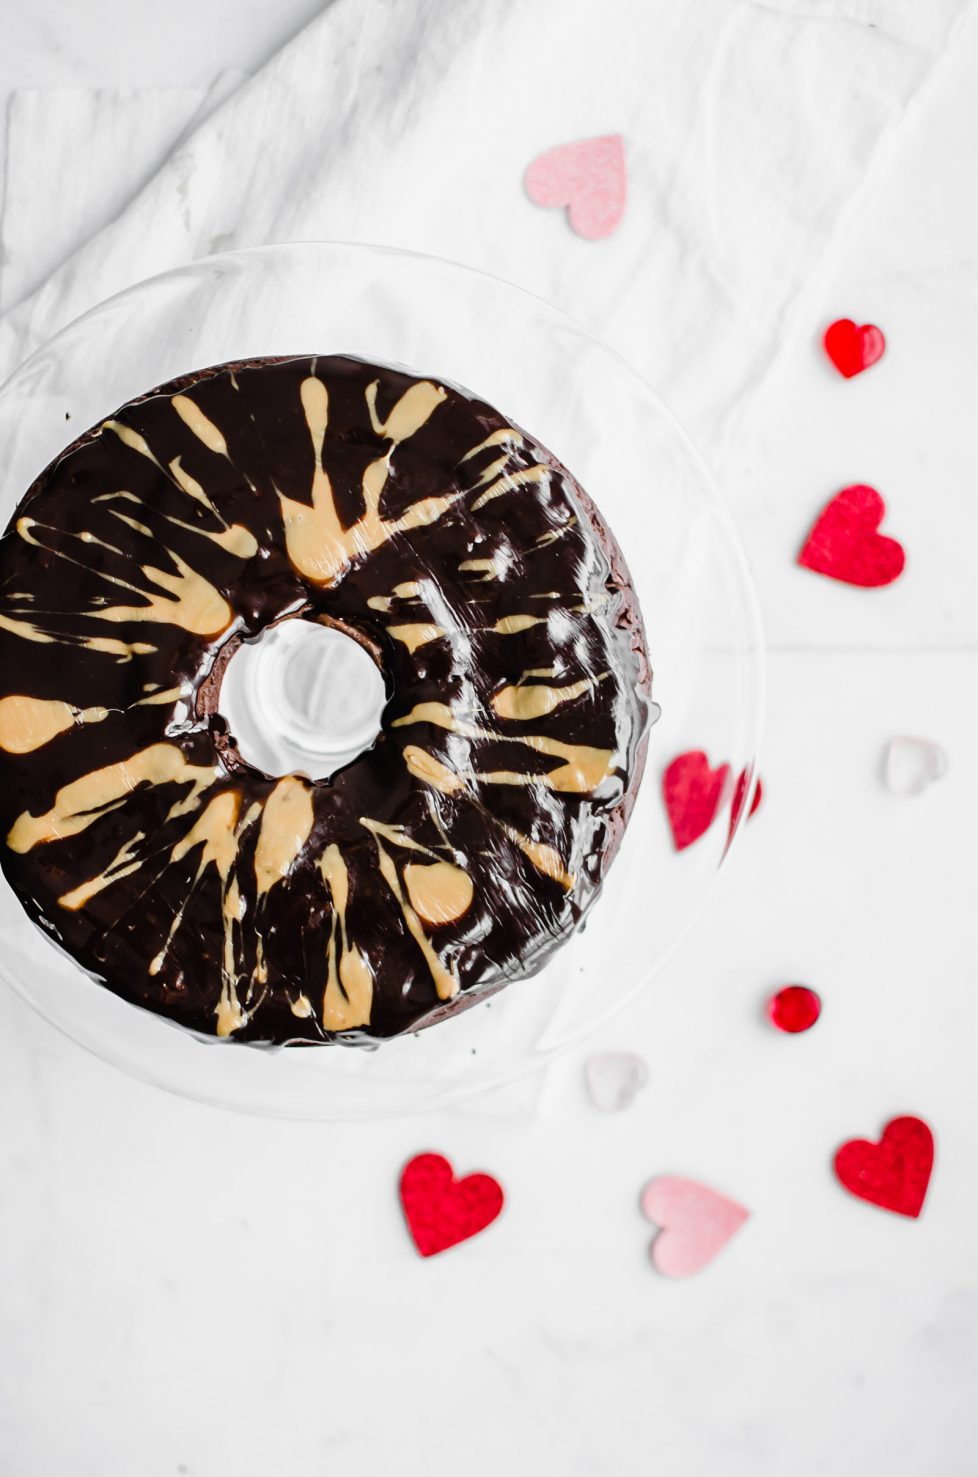 This recipe for Back Pocket Chocolate Fudge Cake is an easy bundt cake that is super moist, fudgy, and extra delicious. It's made with Ghirardelli chocolate, sour cream, and topped with hot fudge and caramel! #valentines #chocolatecake